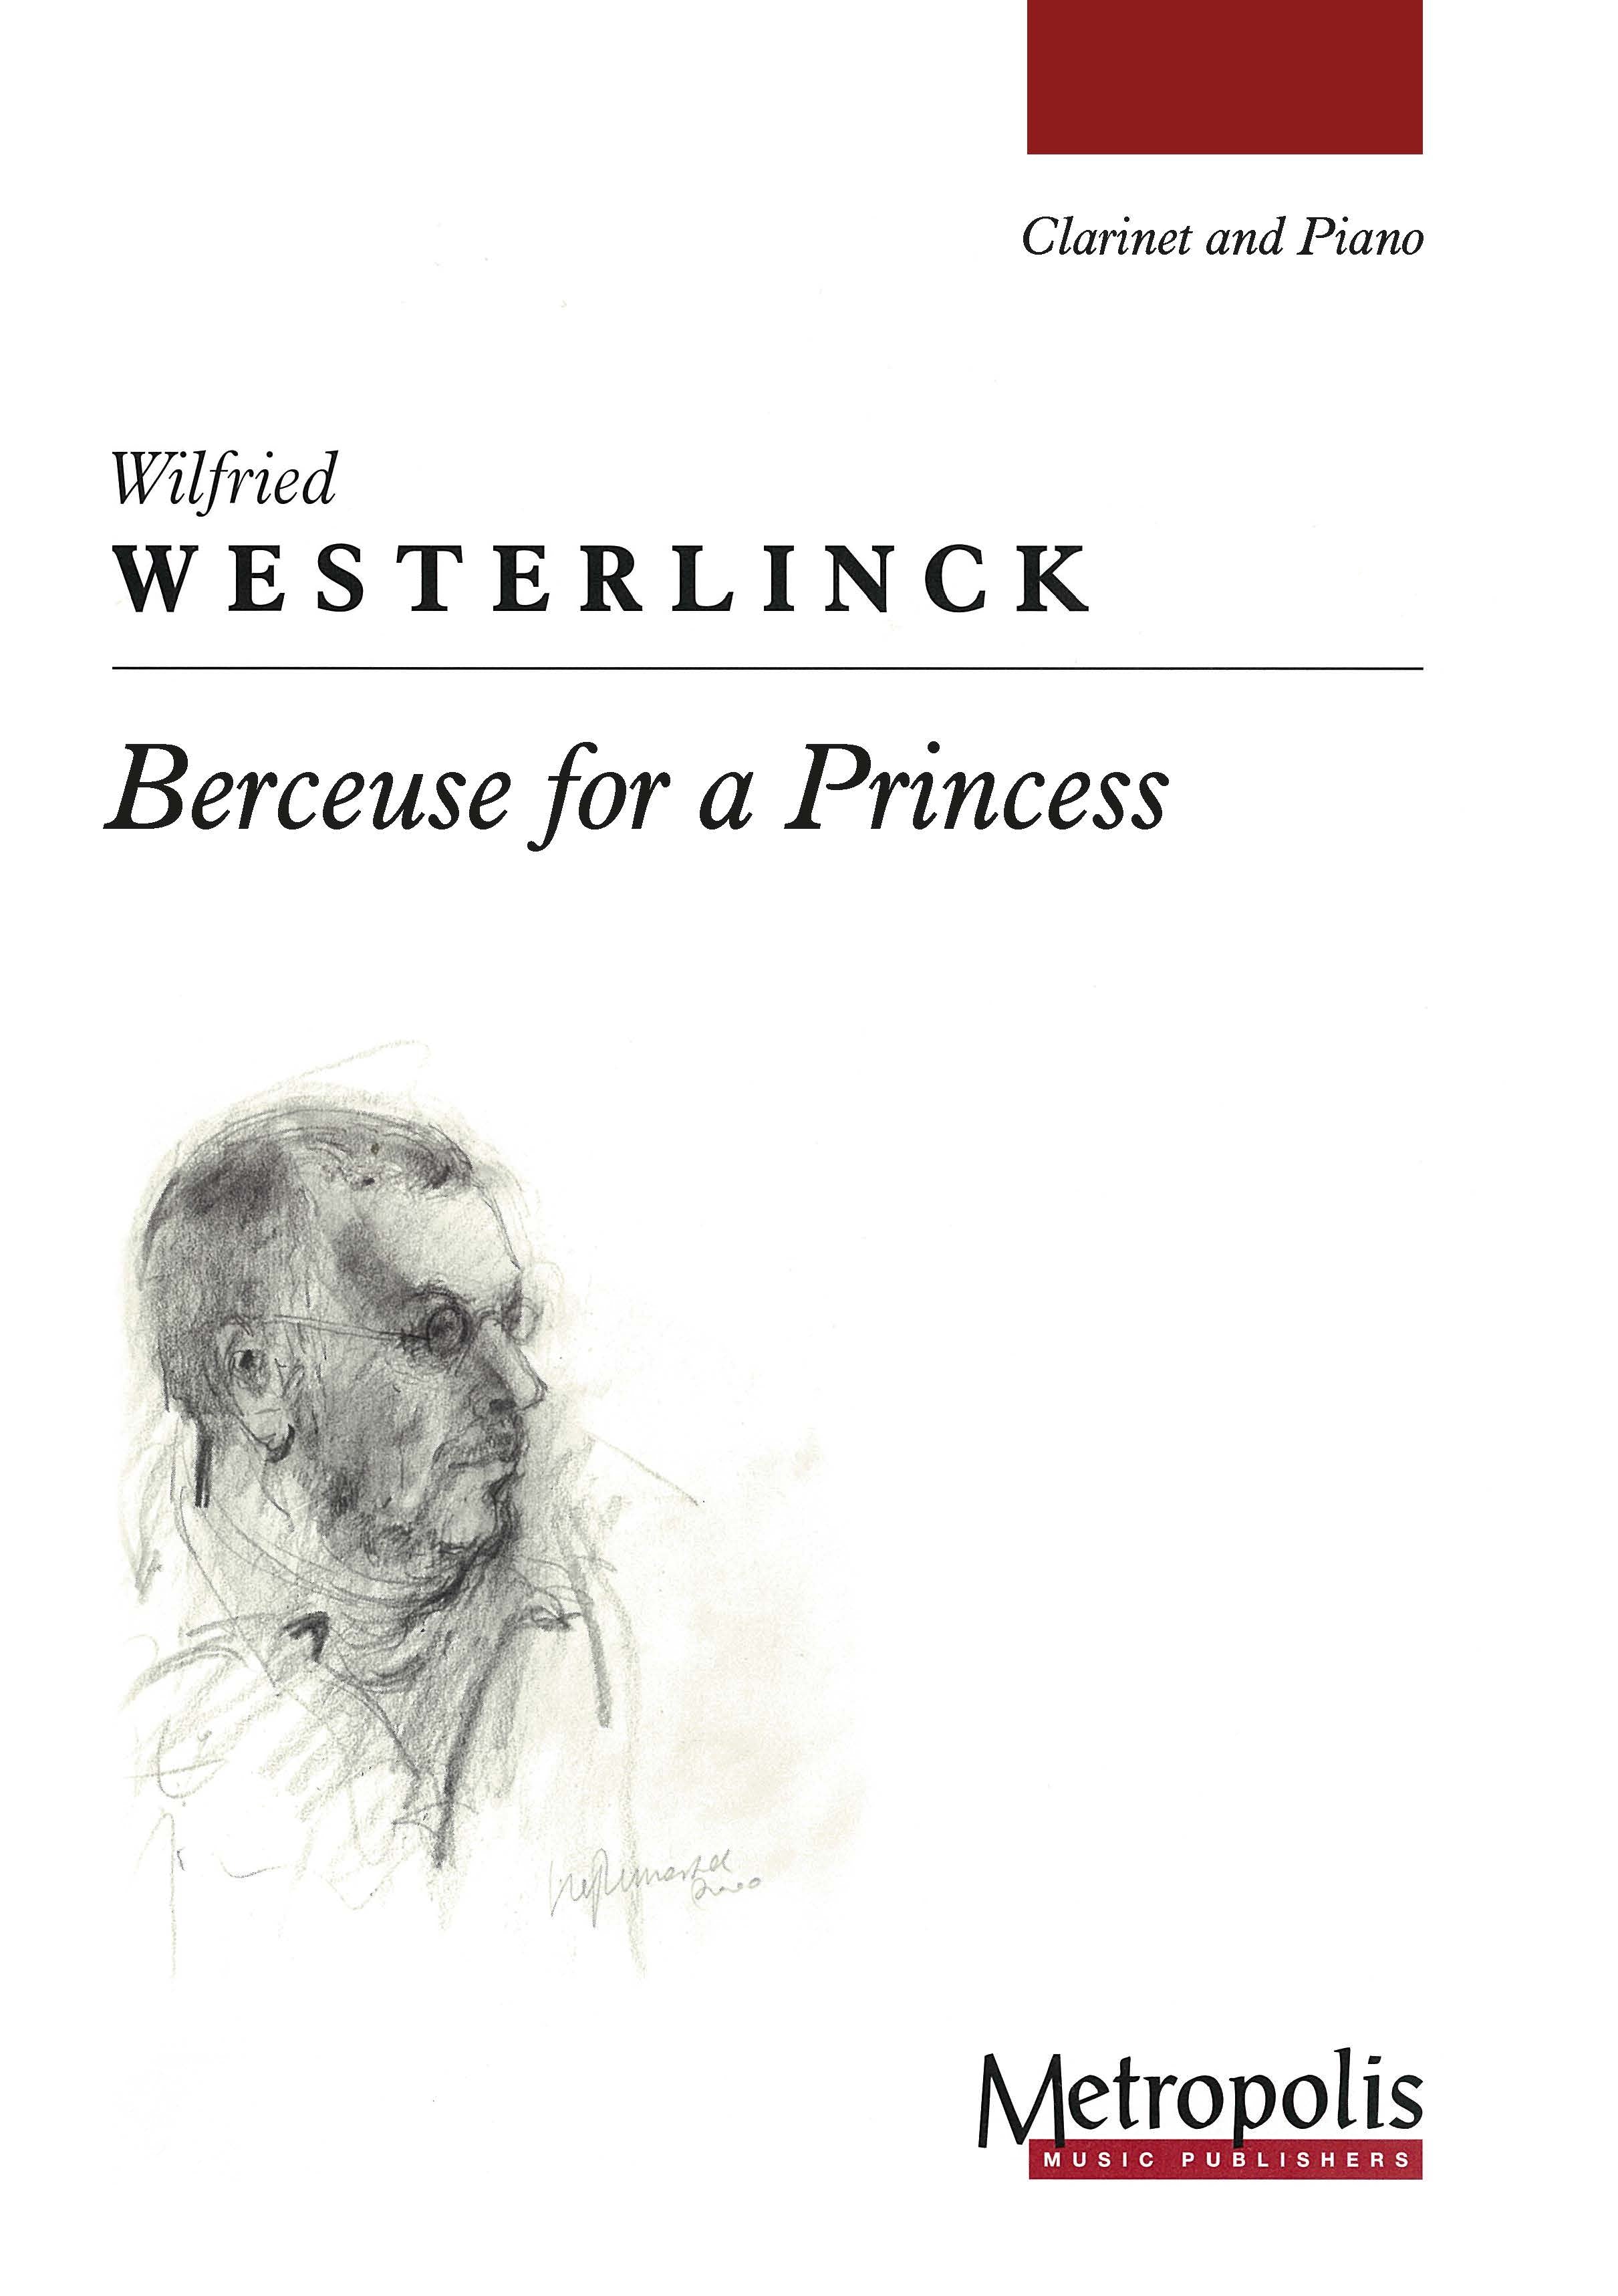 Westerlinck - Berceuse for Clarinet and Piano